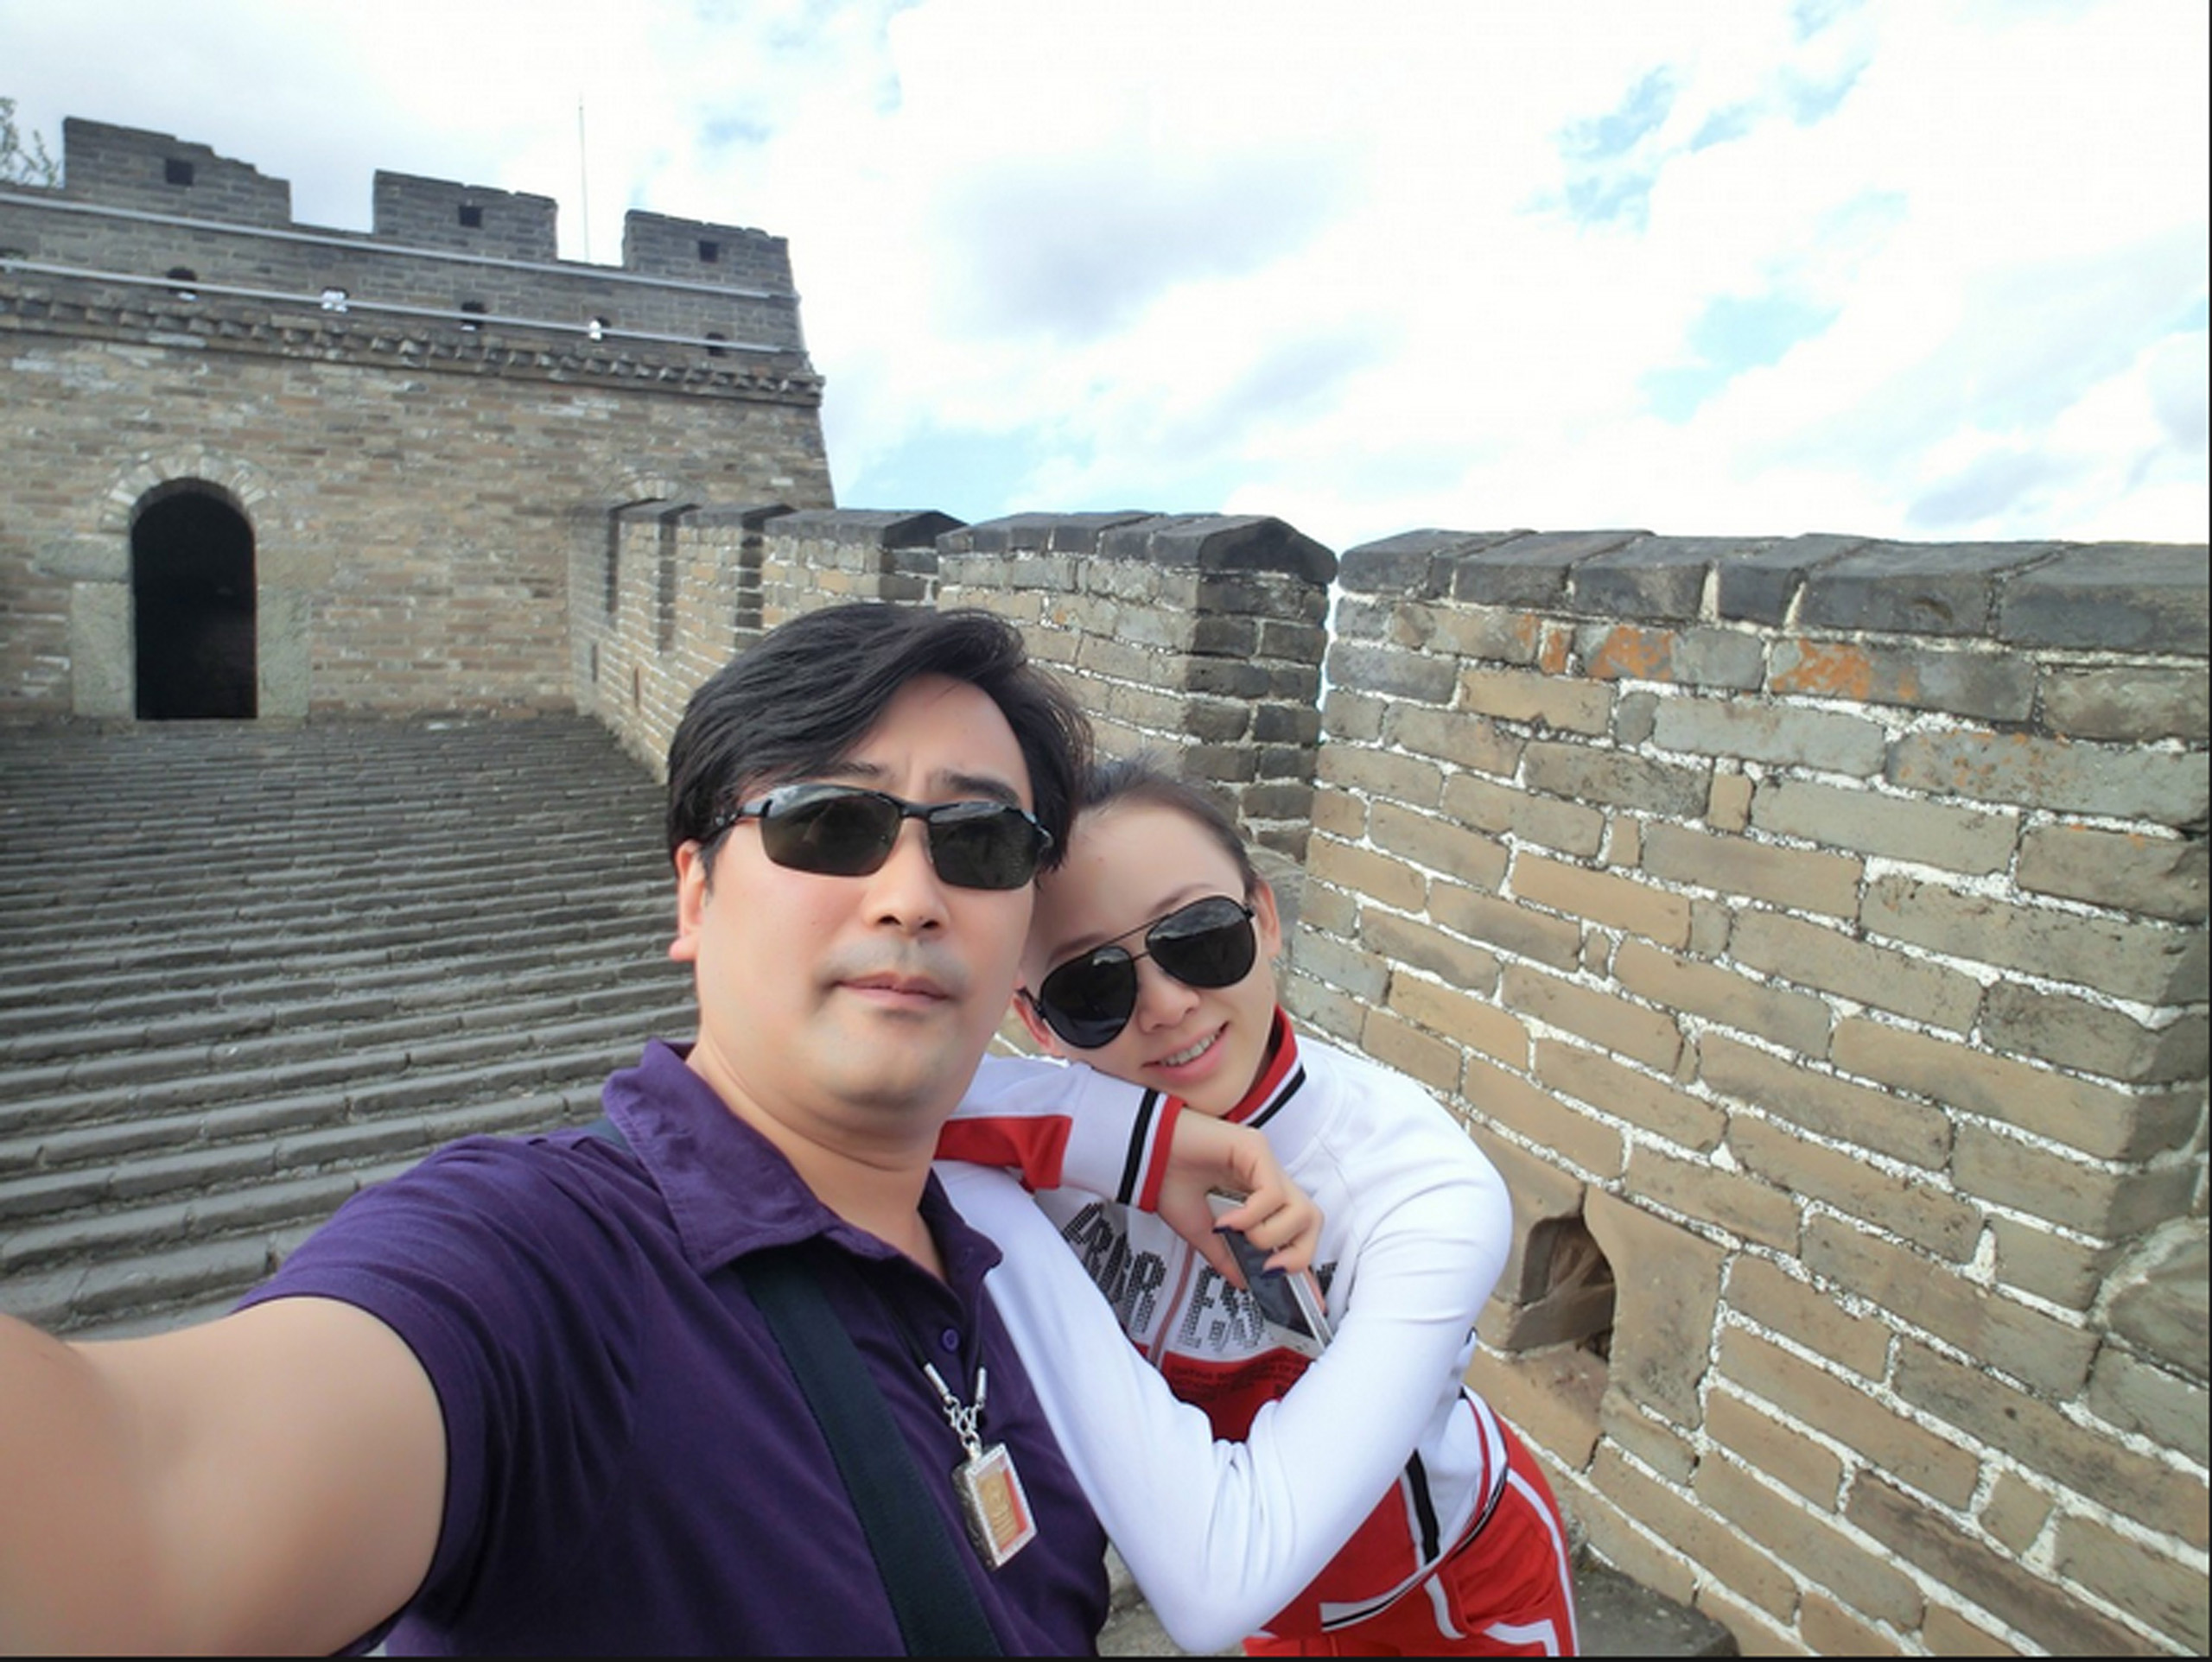 Fan Yue, left, and Ji Yingnan, right, are seen in a selfie taken on the Great Wall of China. Ji released images online after realizing Fan was married. (Courtesy of Ji Yingnan)